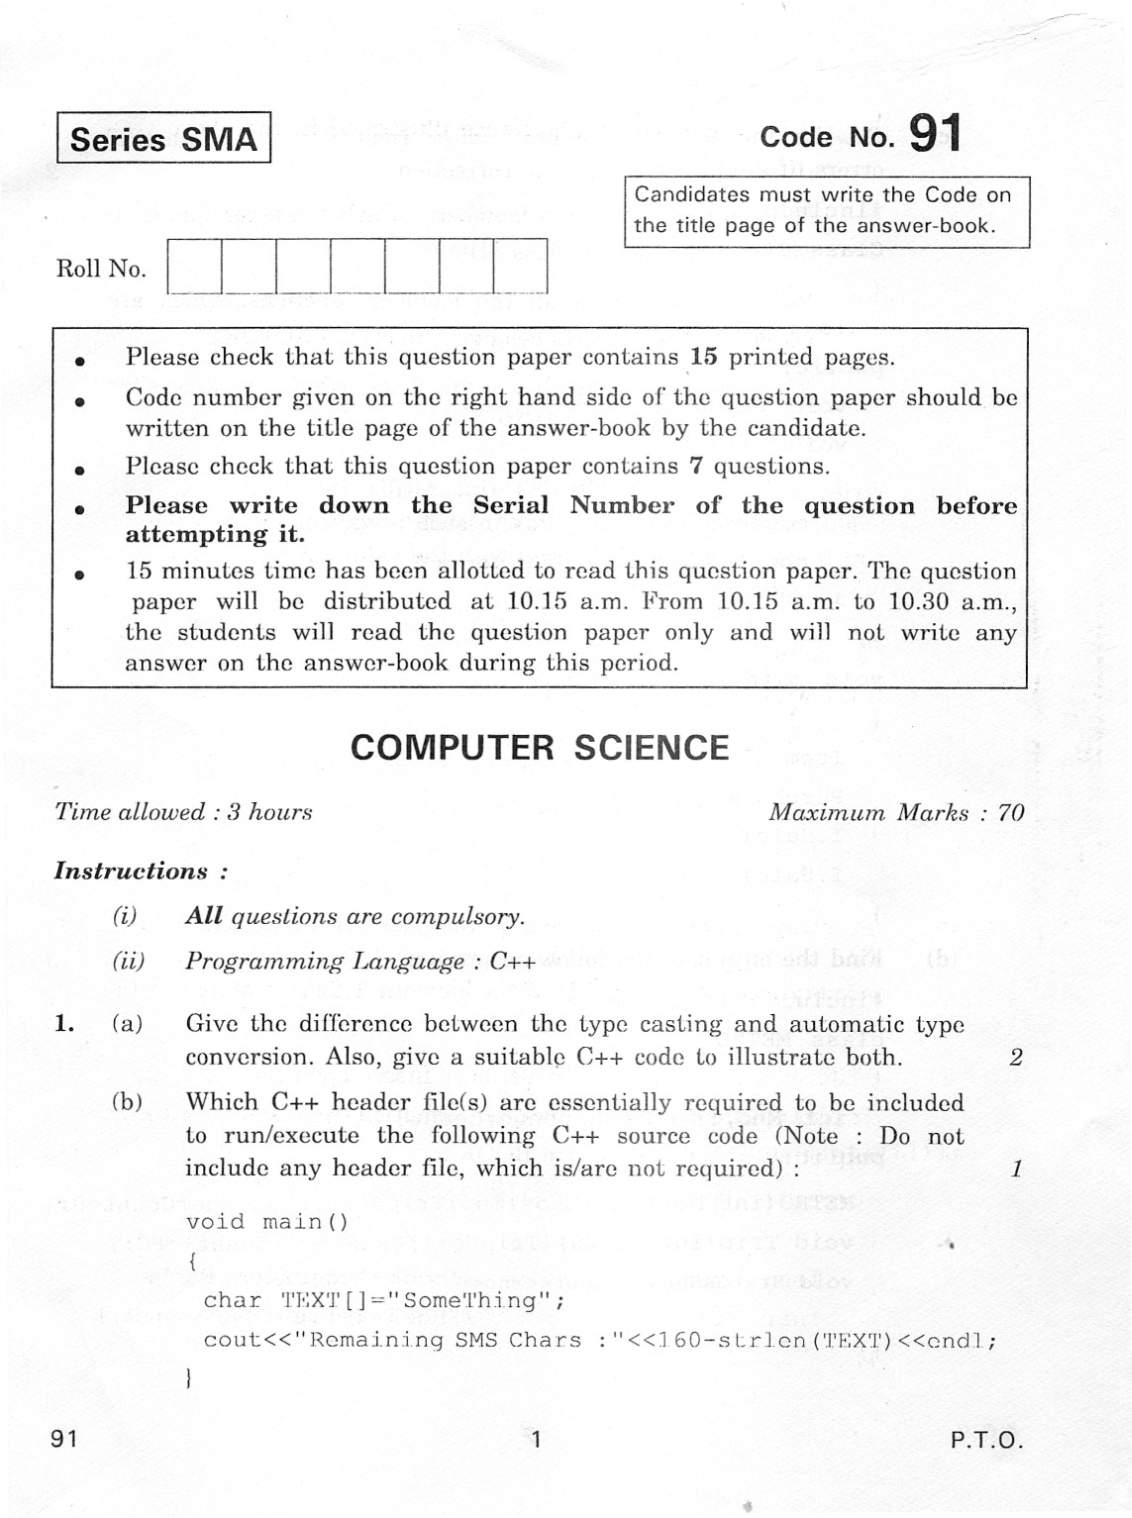 research paper related to computer science